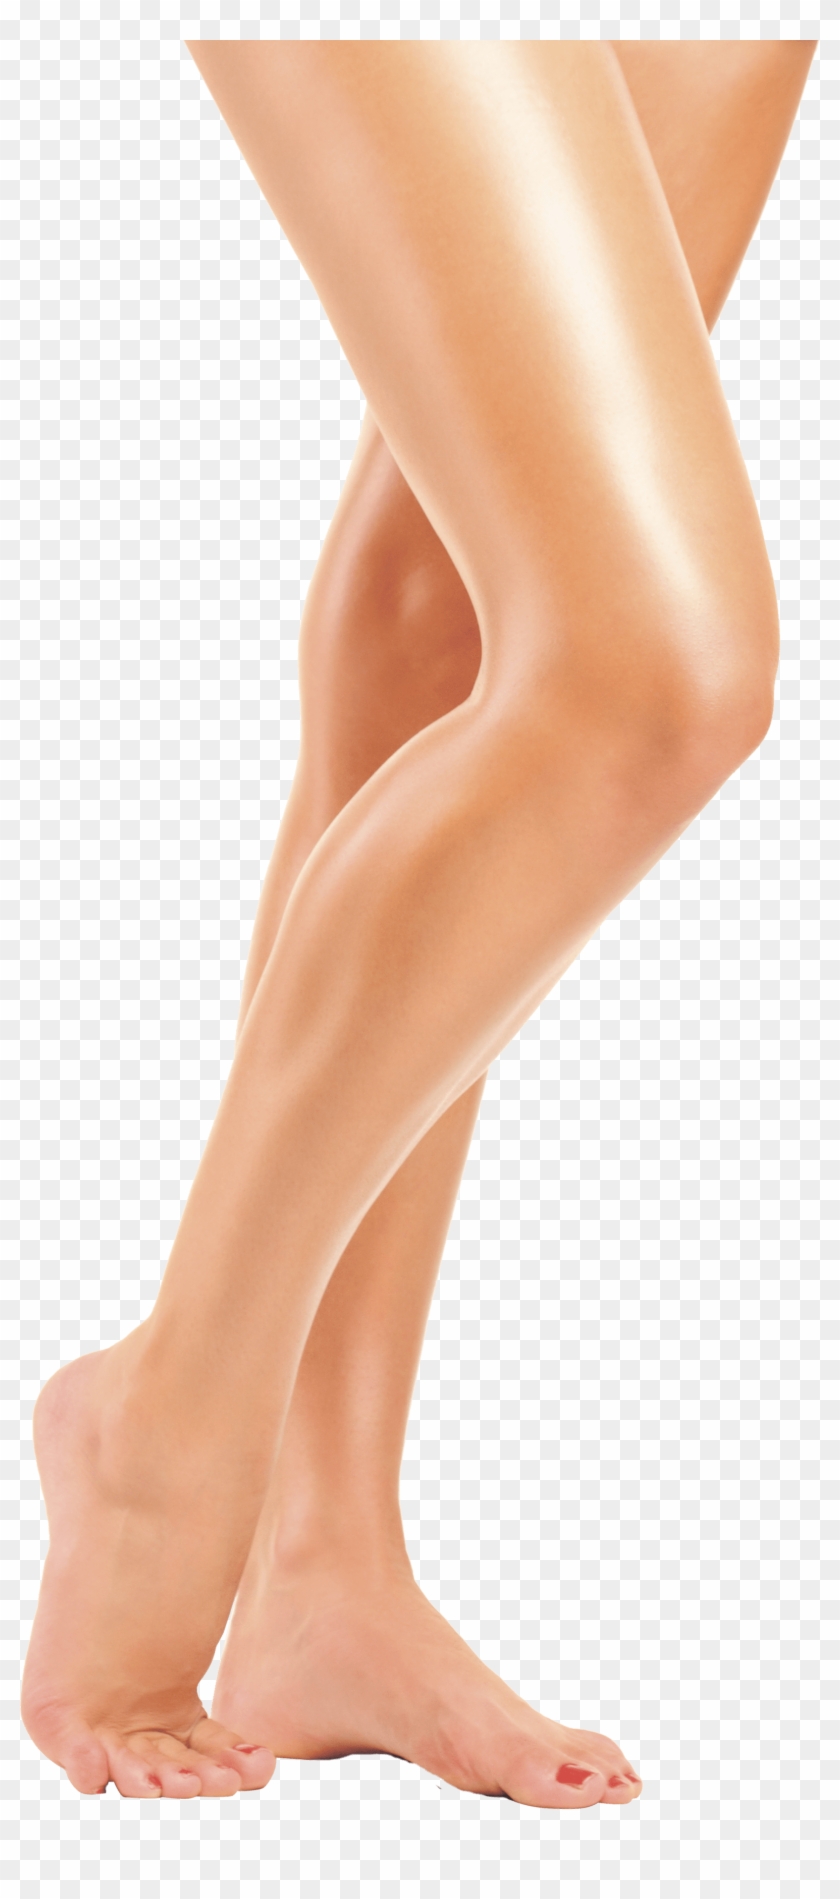 Legs Hd Png - Legs Png Clipart #218410